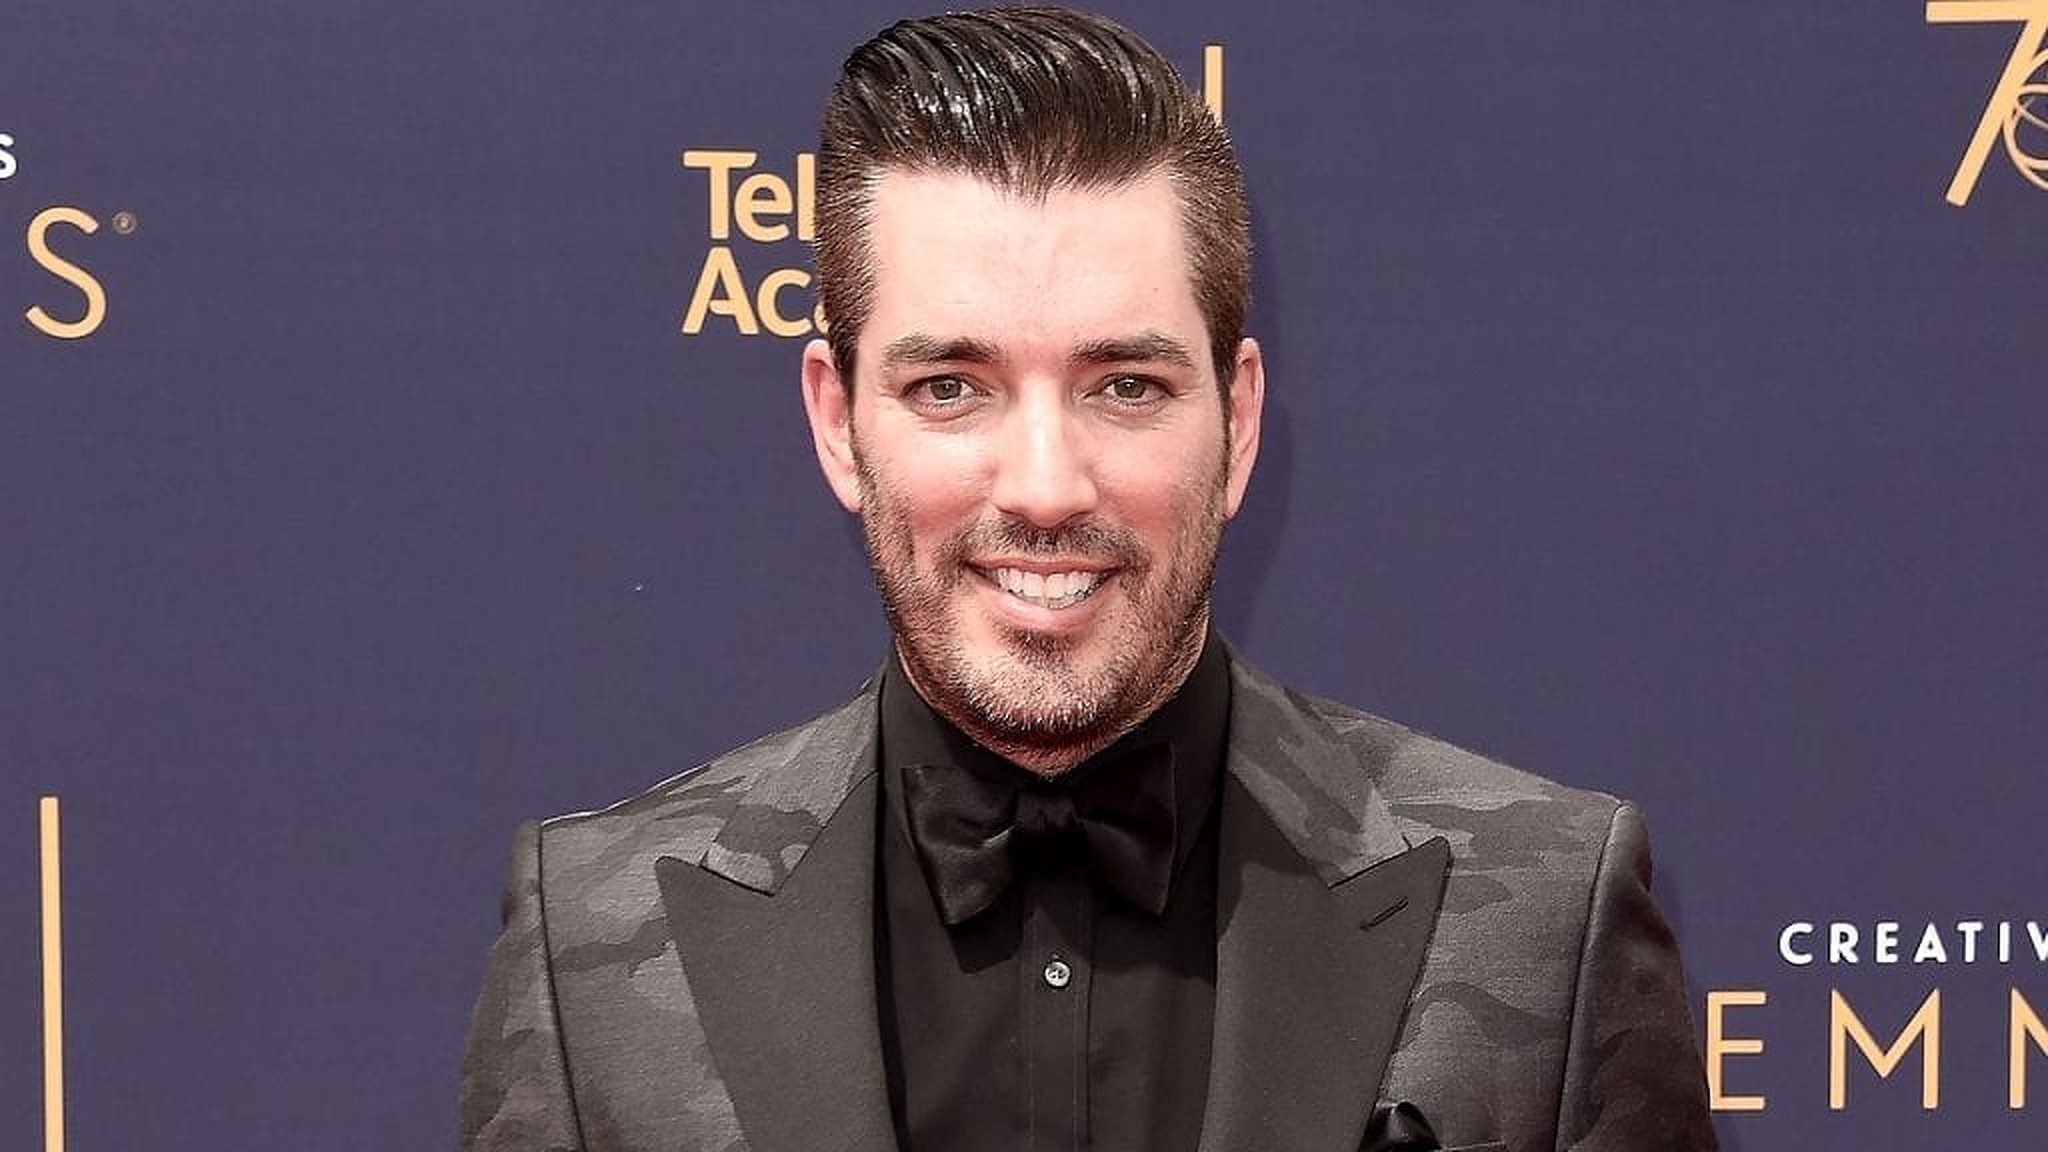 Property Brothers Fun Facts - Jonathan and Drew Scott Married, Net